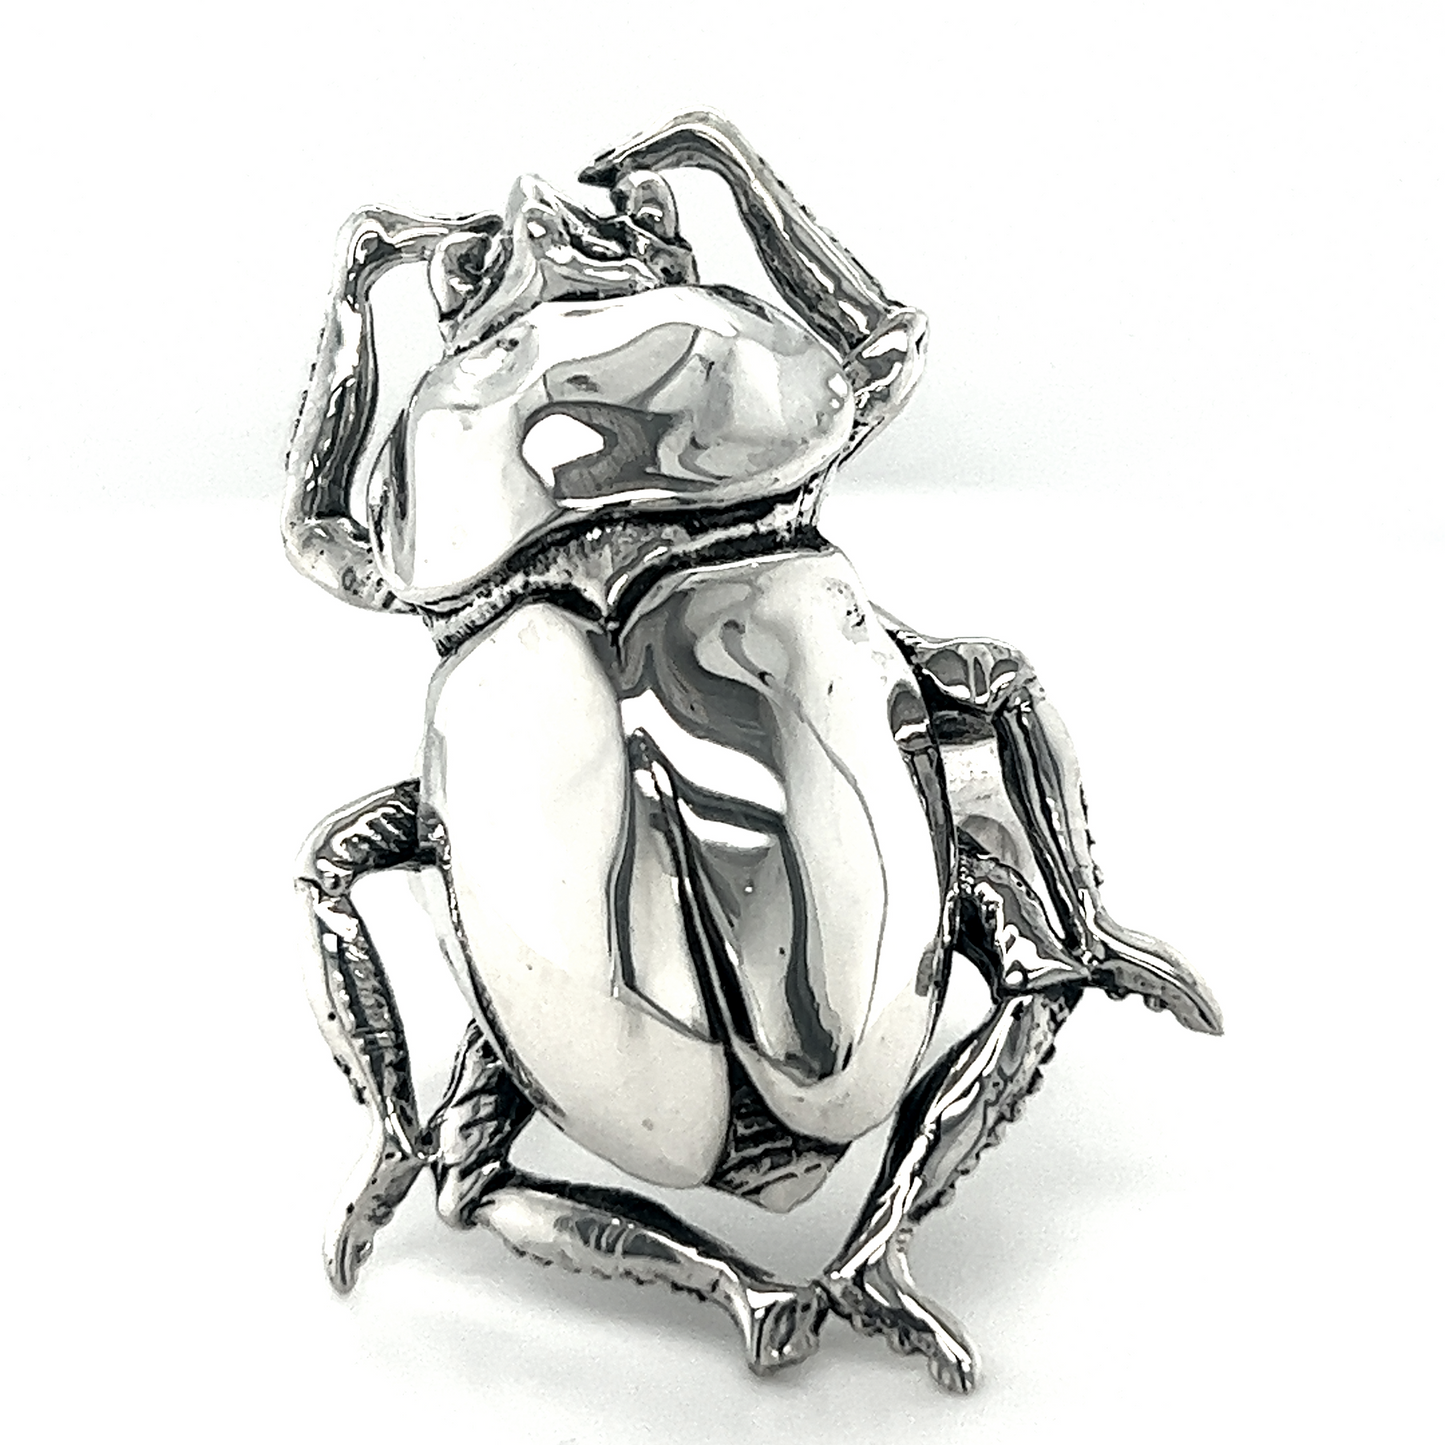 A Statement Scarab Beetle Ring on a white background.